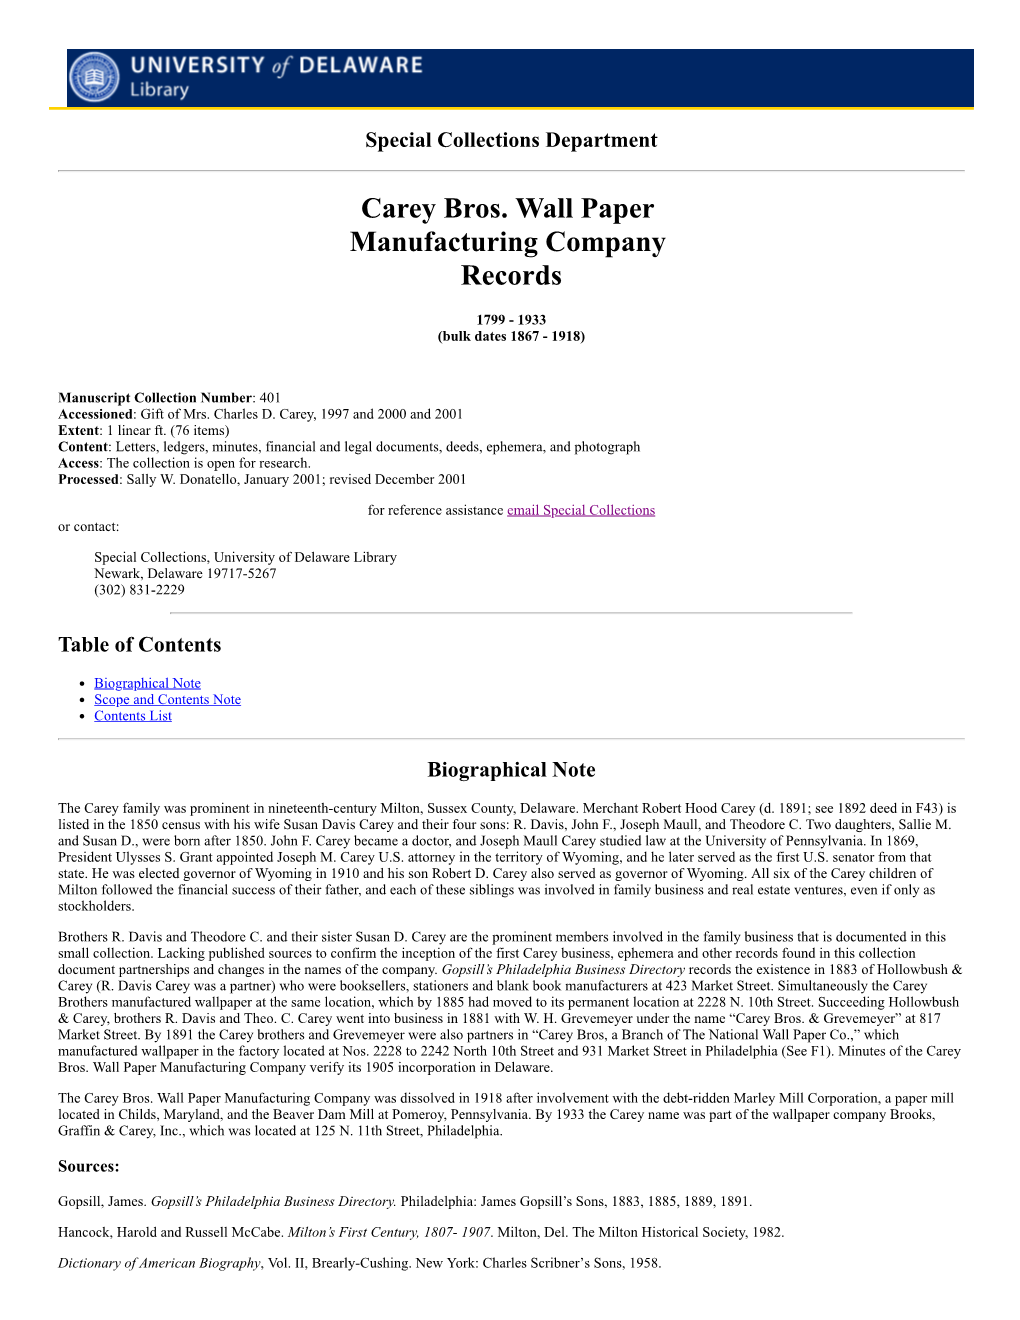 Carey Bros. Wall Paper Manufacturing Company Records